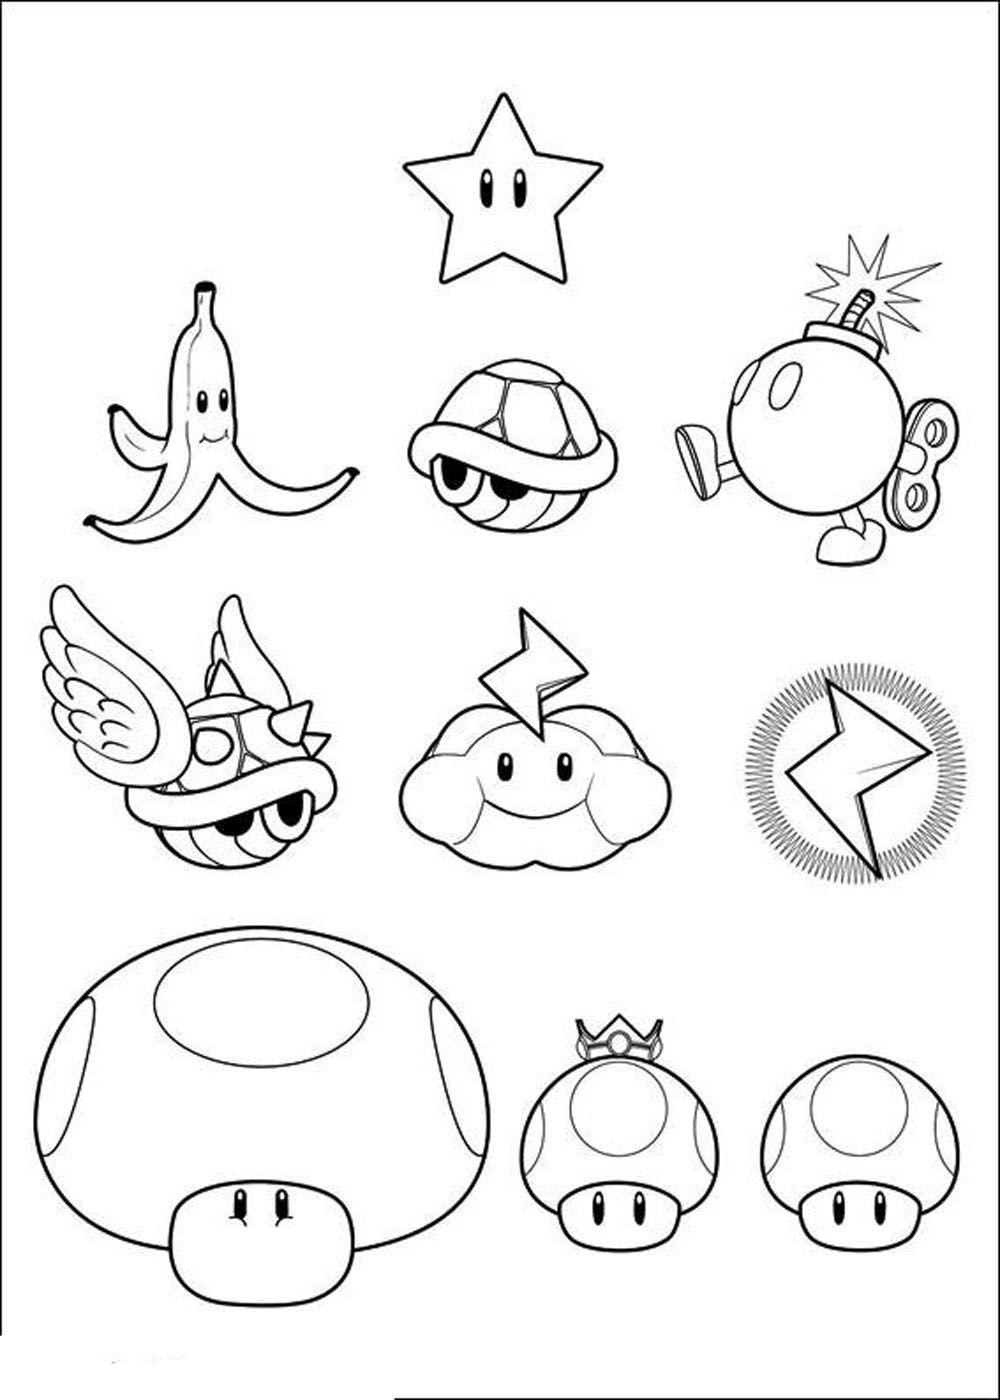 Super Mario Bros Characters Coloring Pages Coloring Home